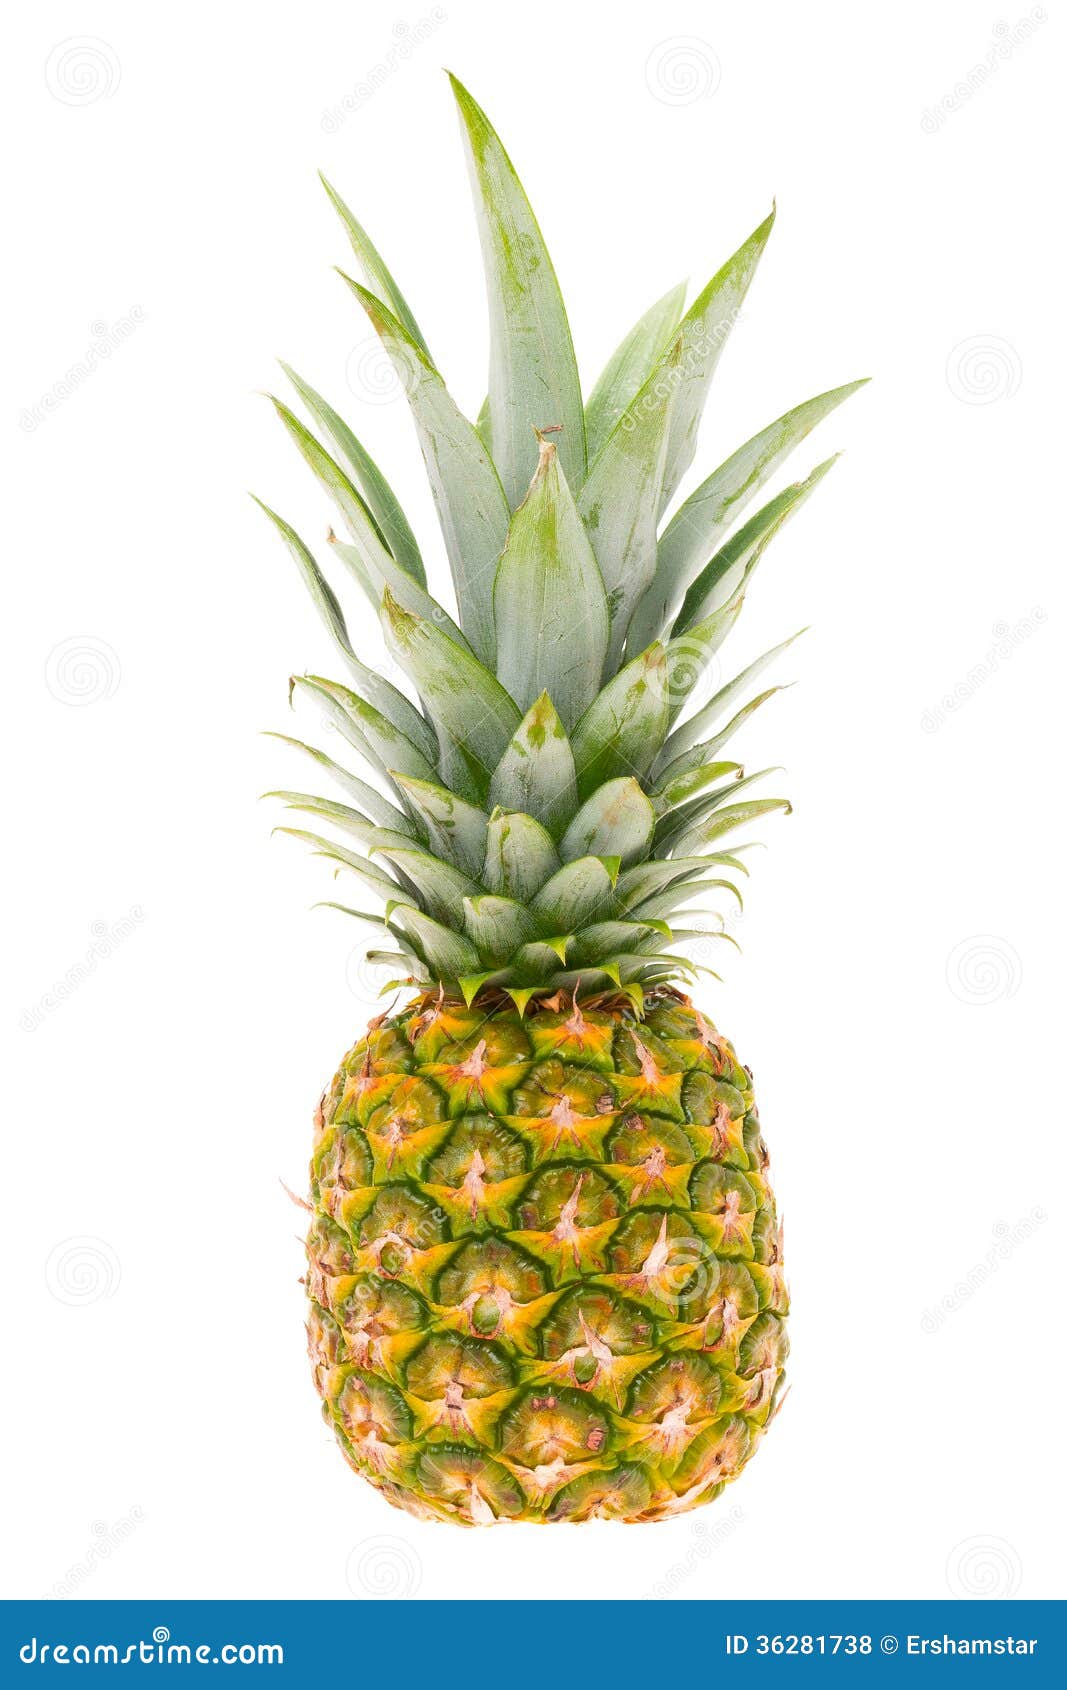 Pineapple stock photo. Image of sweet, length, color - 36281738